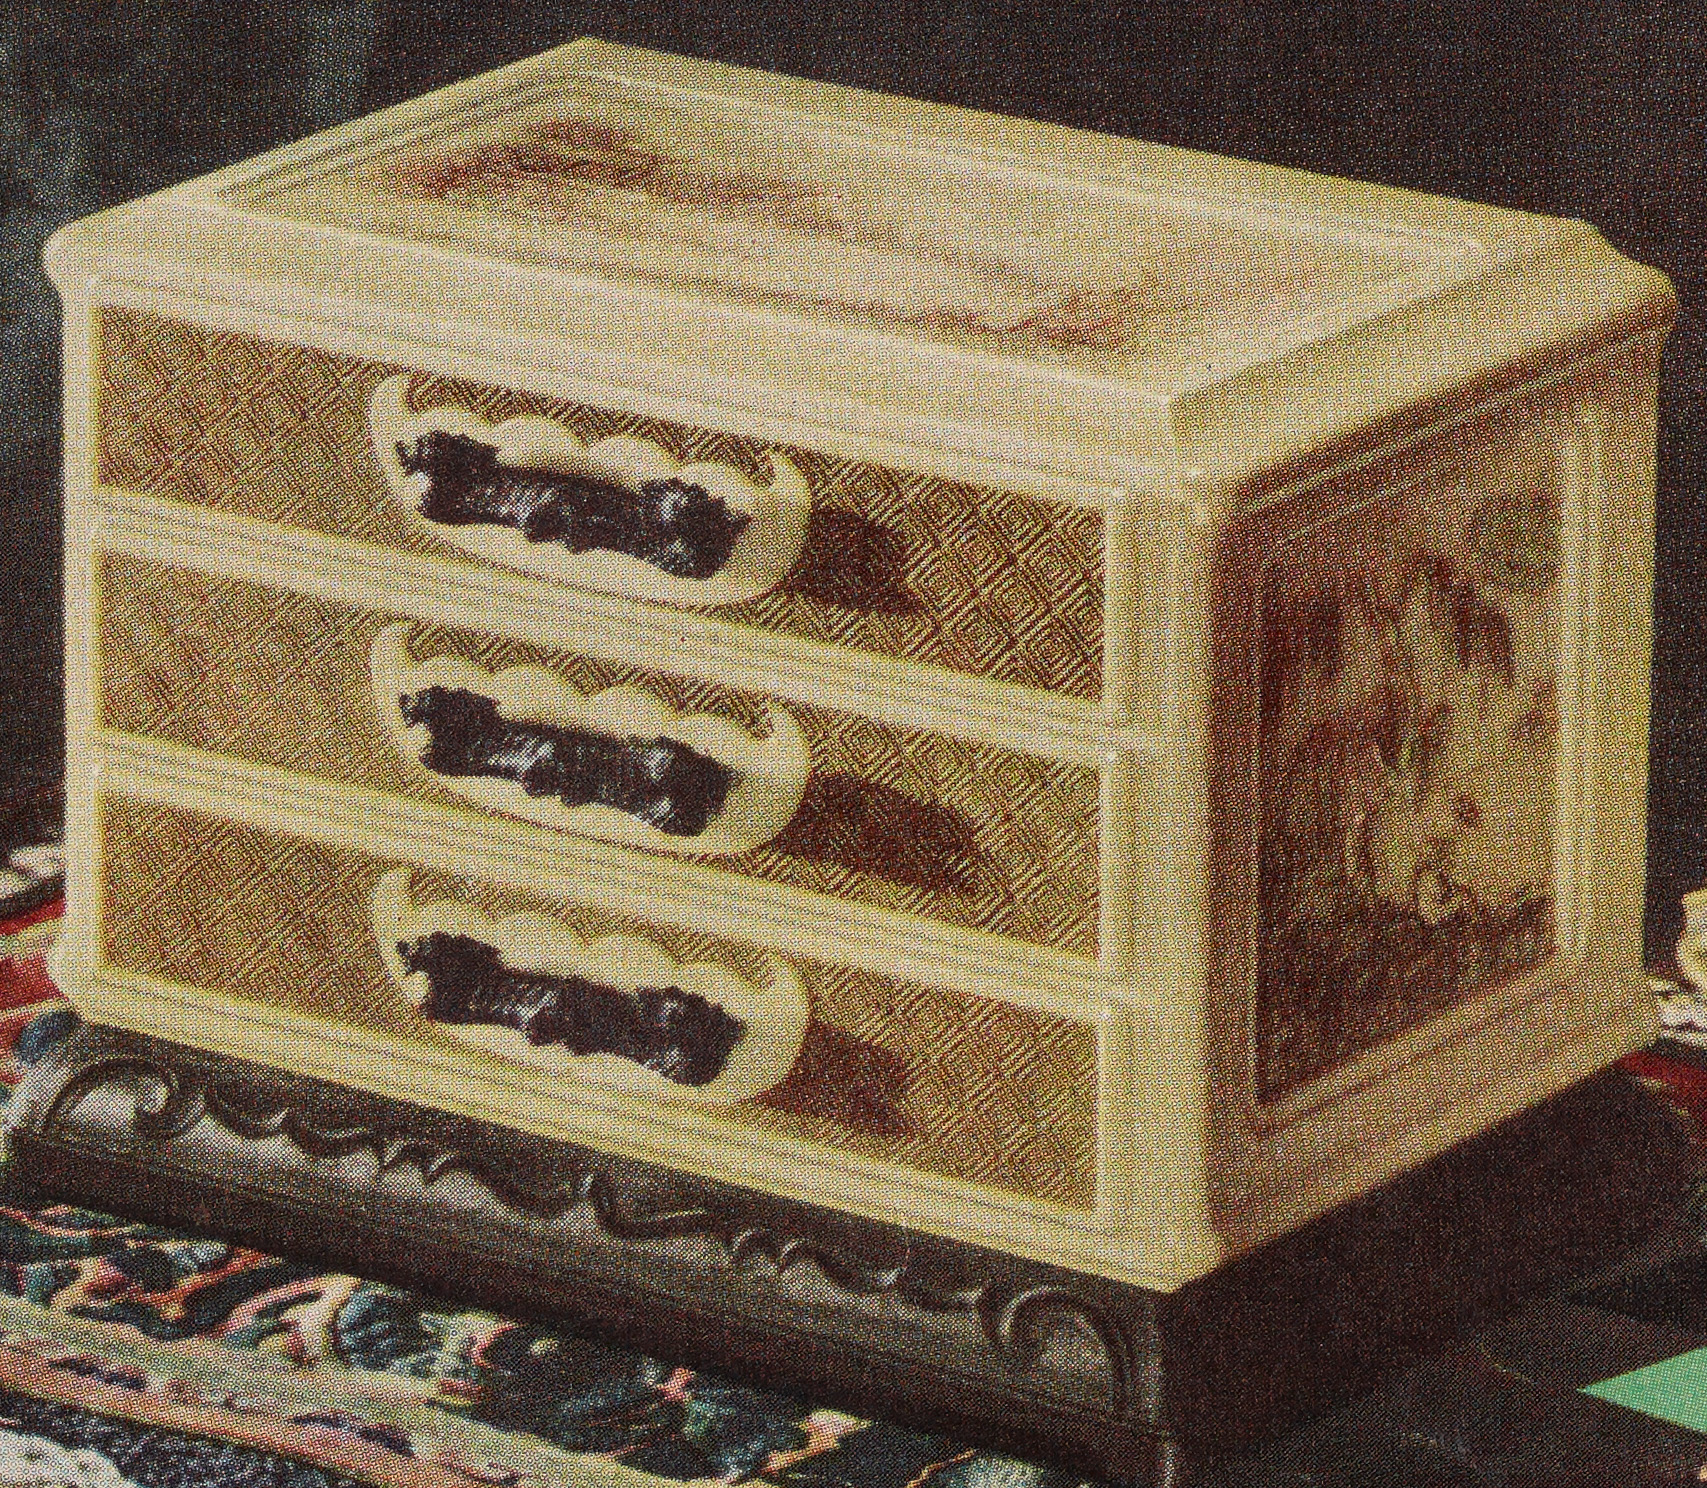 Styron plastic chest with dragon handles